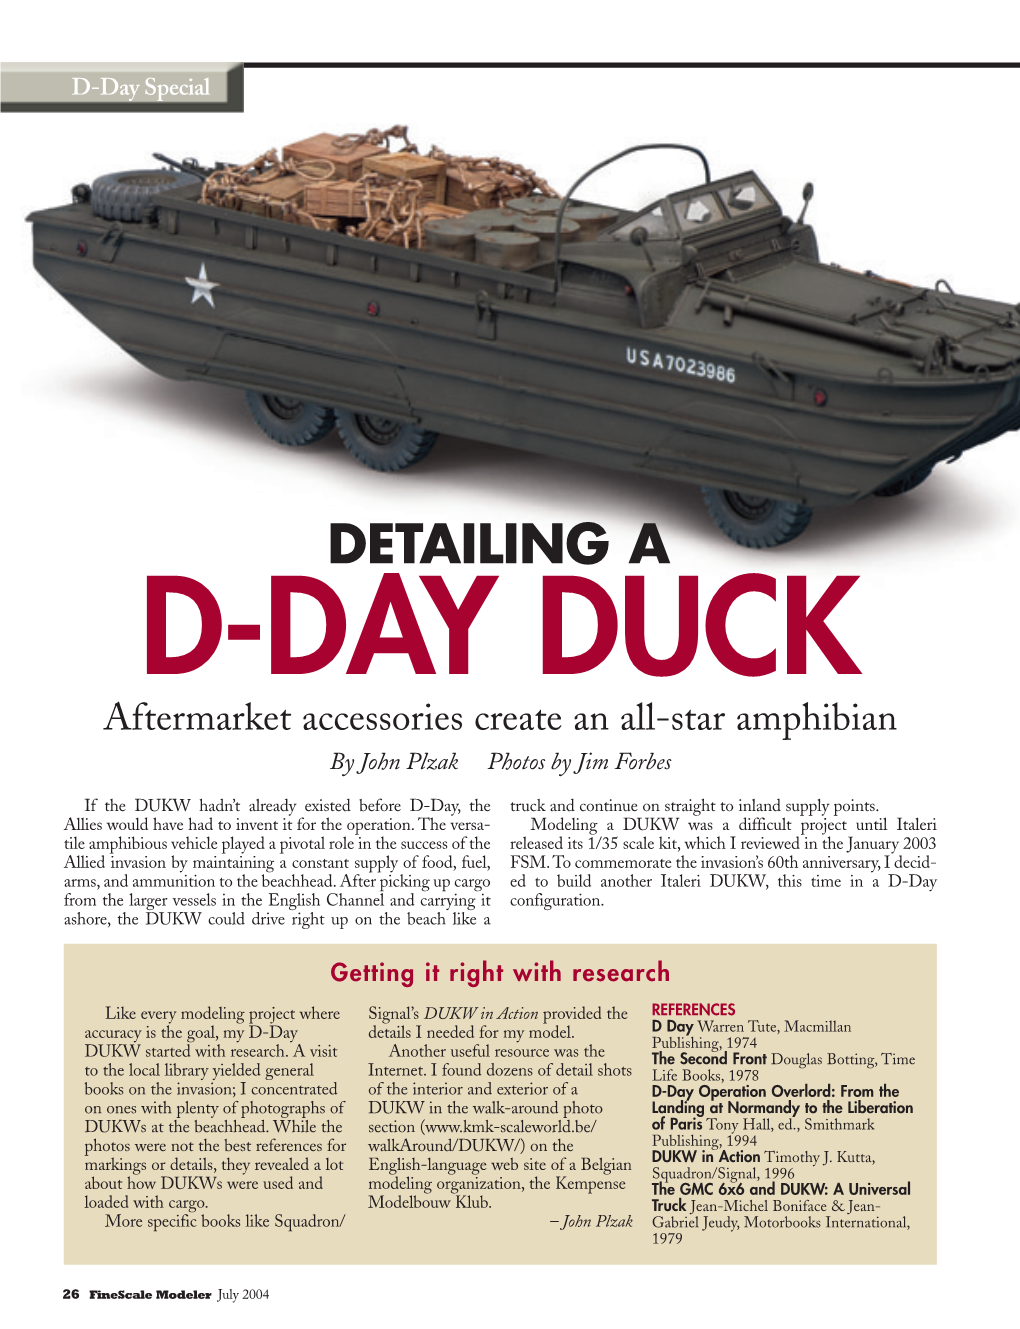 DETAILING a D-DAY DUCK Aftermarket Accessories Create an All-Star Amphibian by John Plzak Photos by Jim Forbes